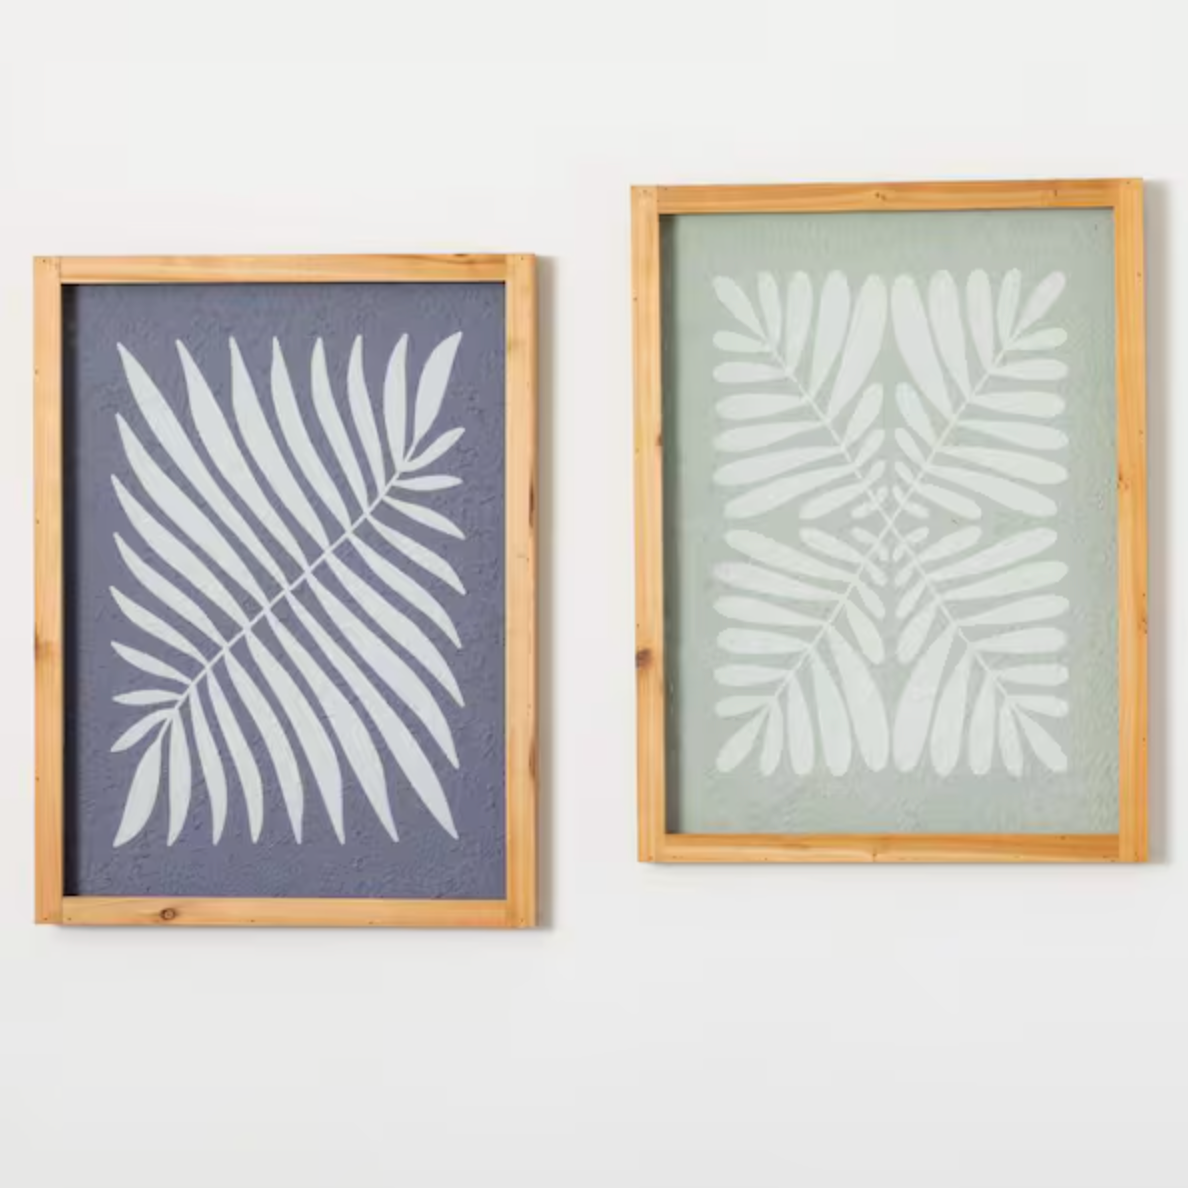 Two framed pieces of art featuring abstract leaf designs, one with a dark blue background and the other with a light green background.